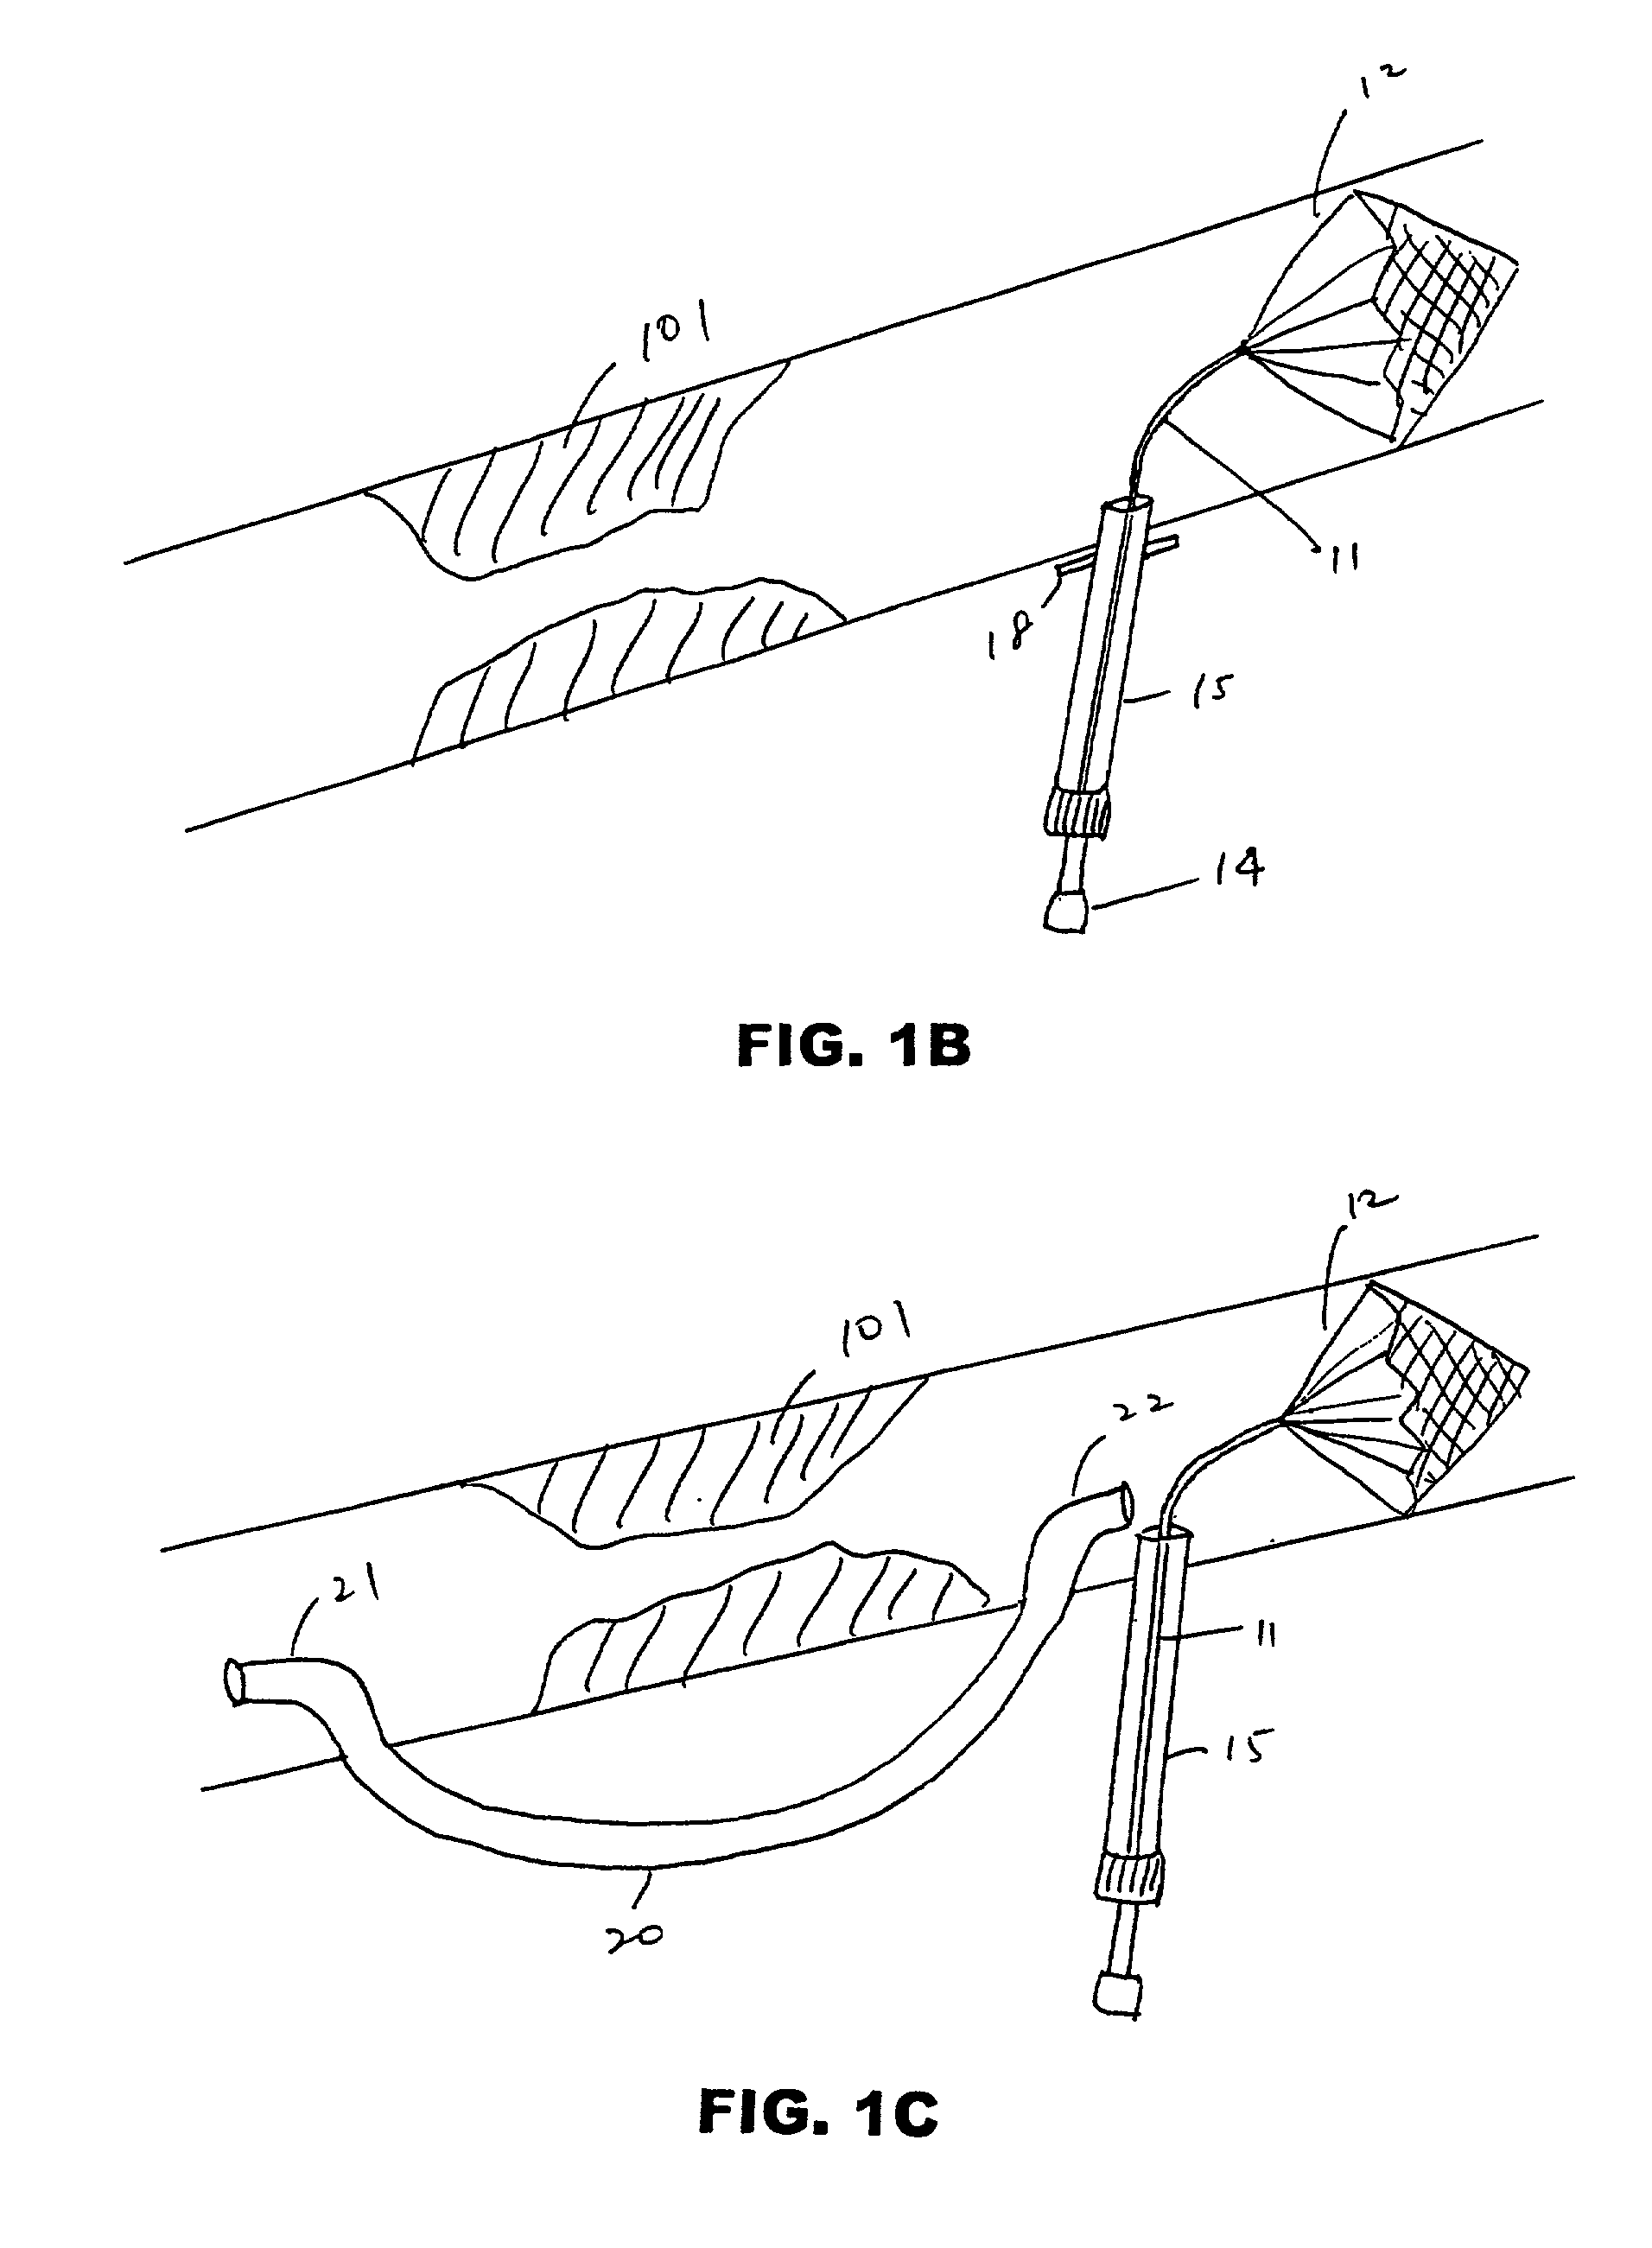 Cerebral protection during carotid endarterectomy and methods of use